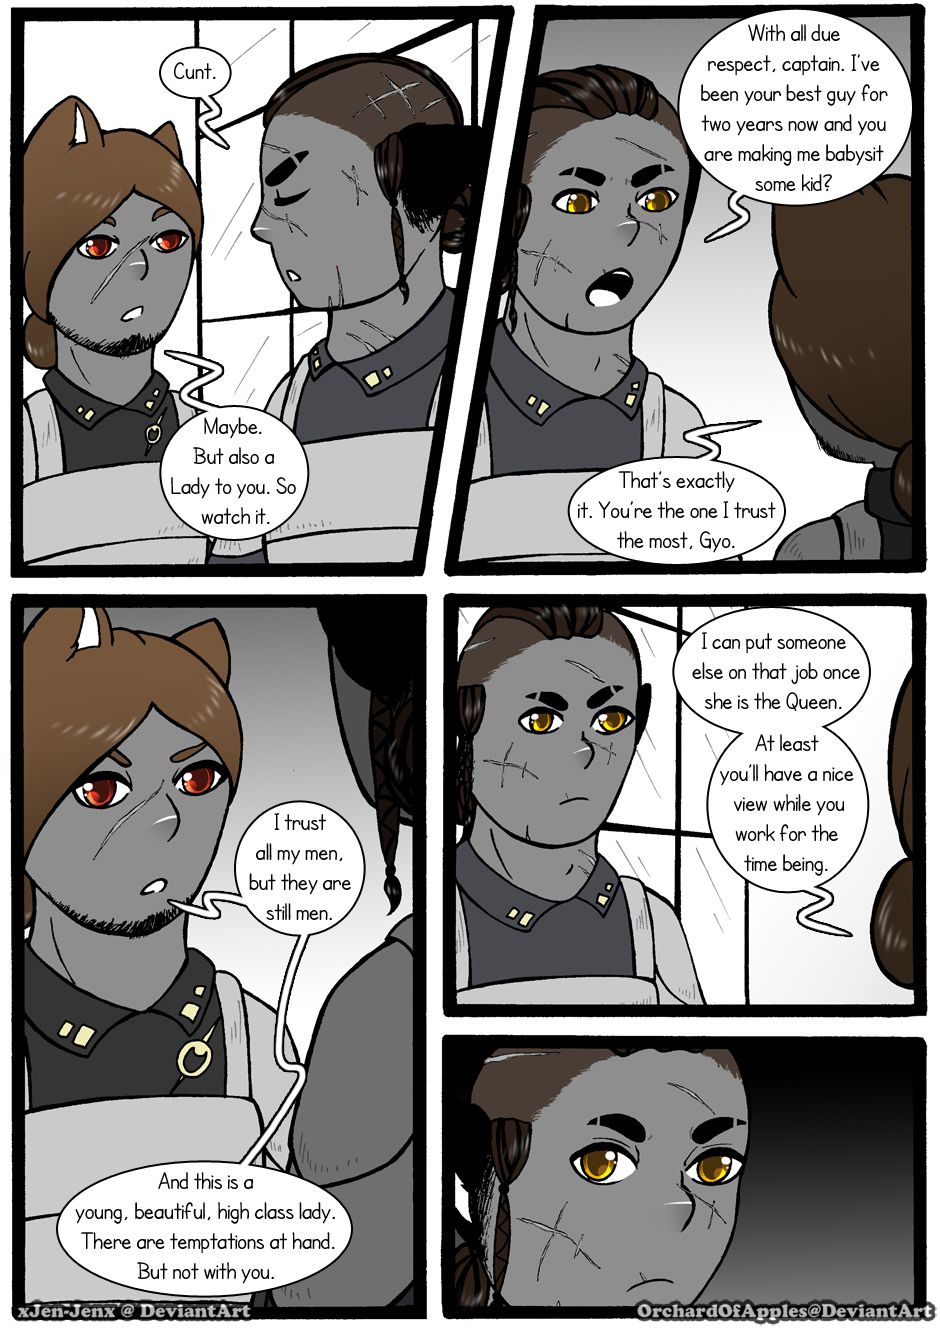 [Jeny-jen94] Between Kings and Queens [Ongoing] 82